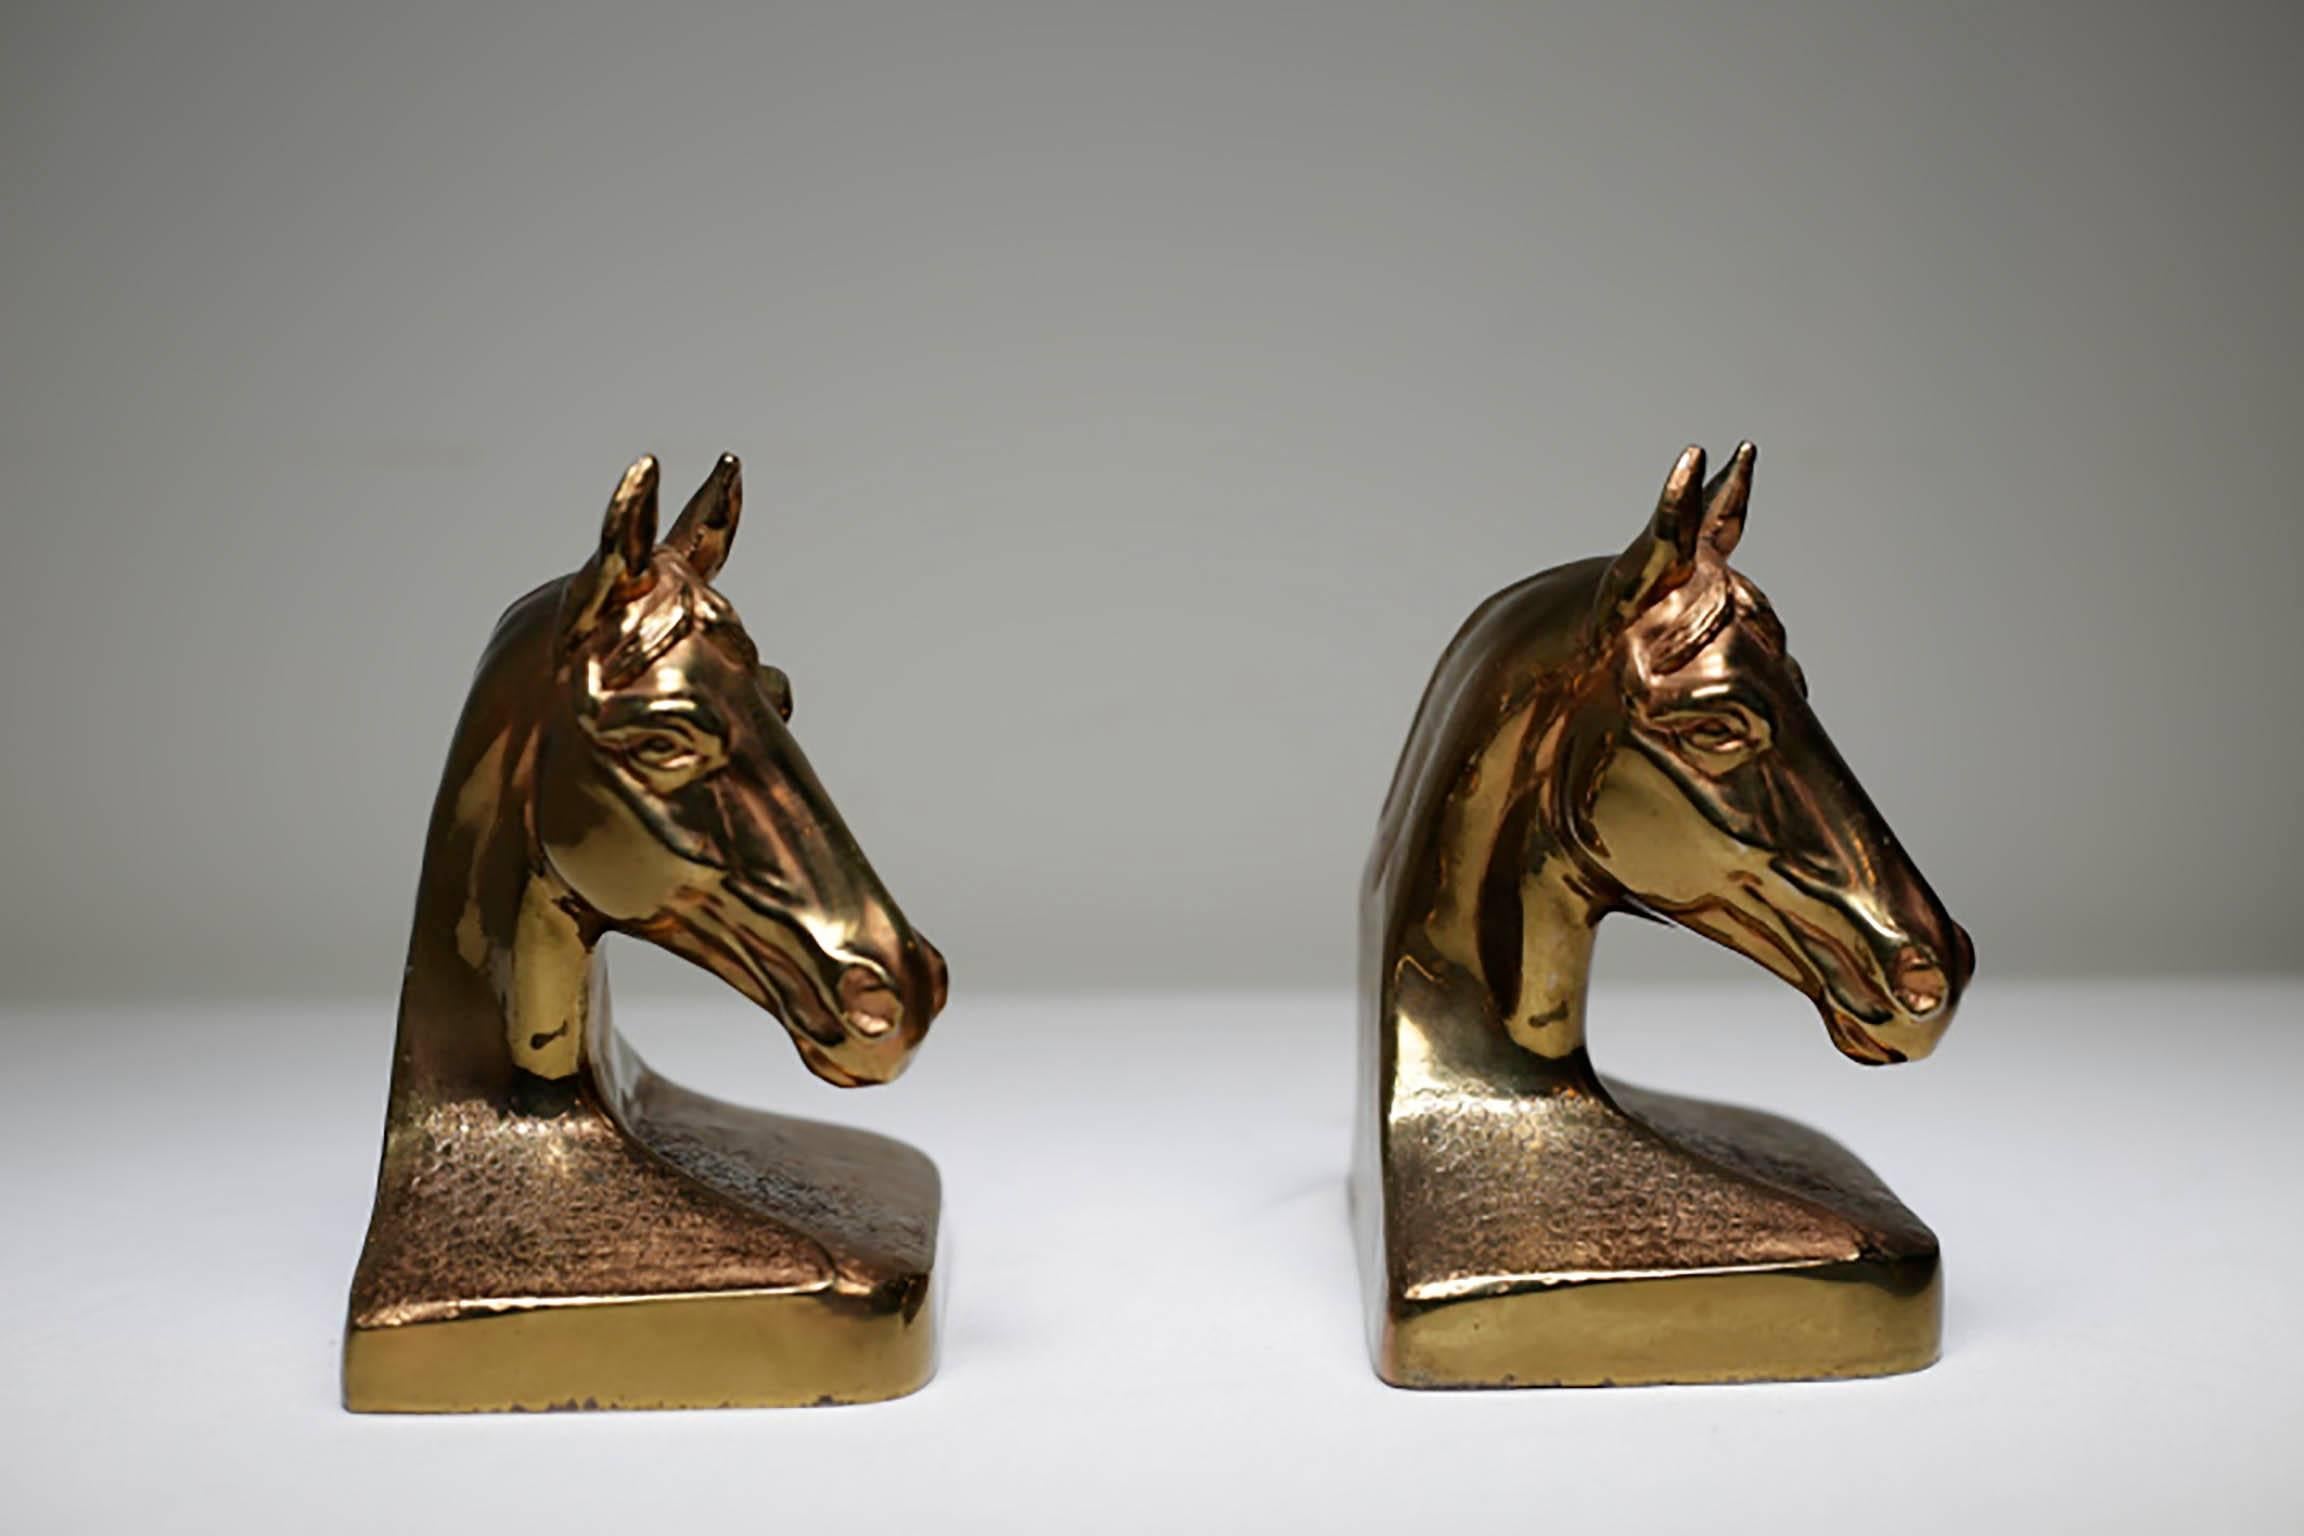 Pair of brass cast with a lacquered finish horse bookends by the Philadelphia Manufacturing Co.